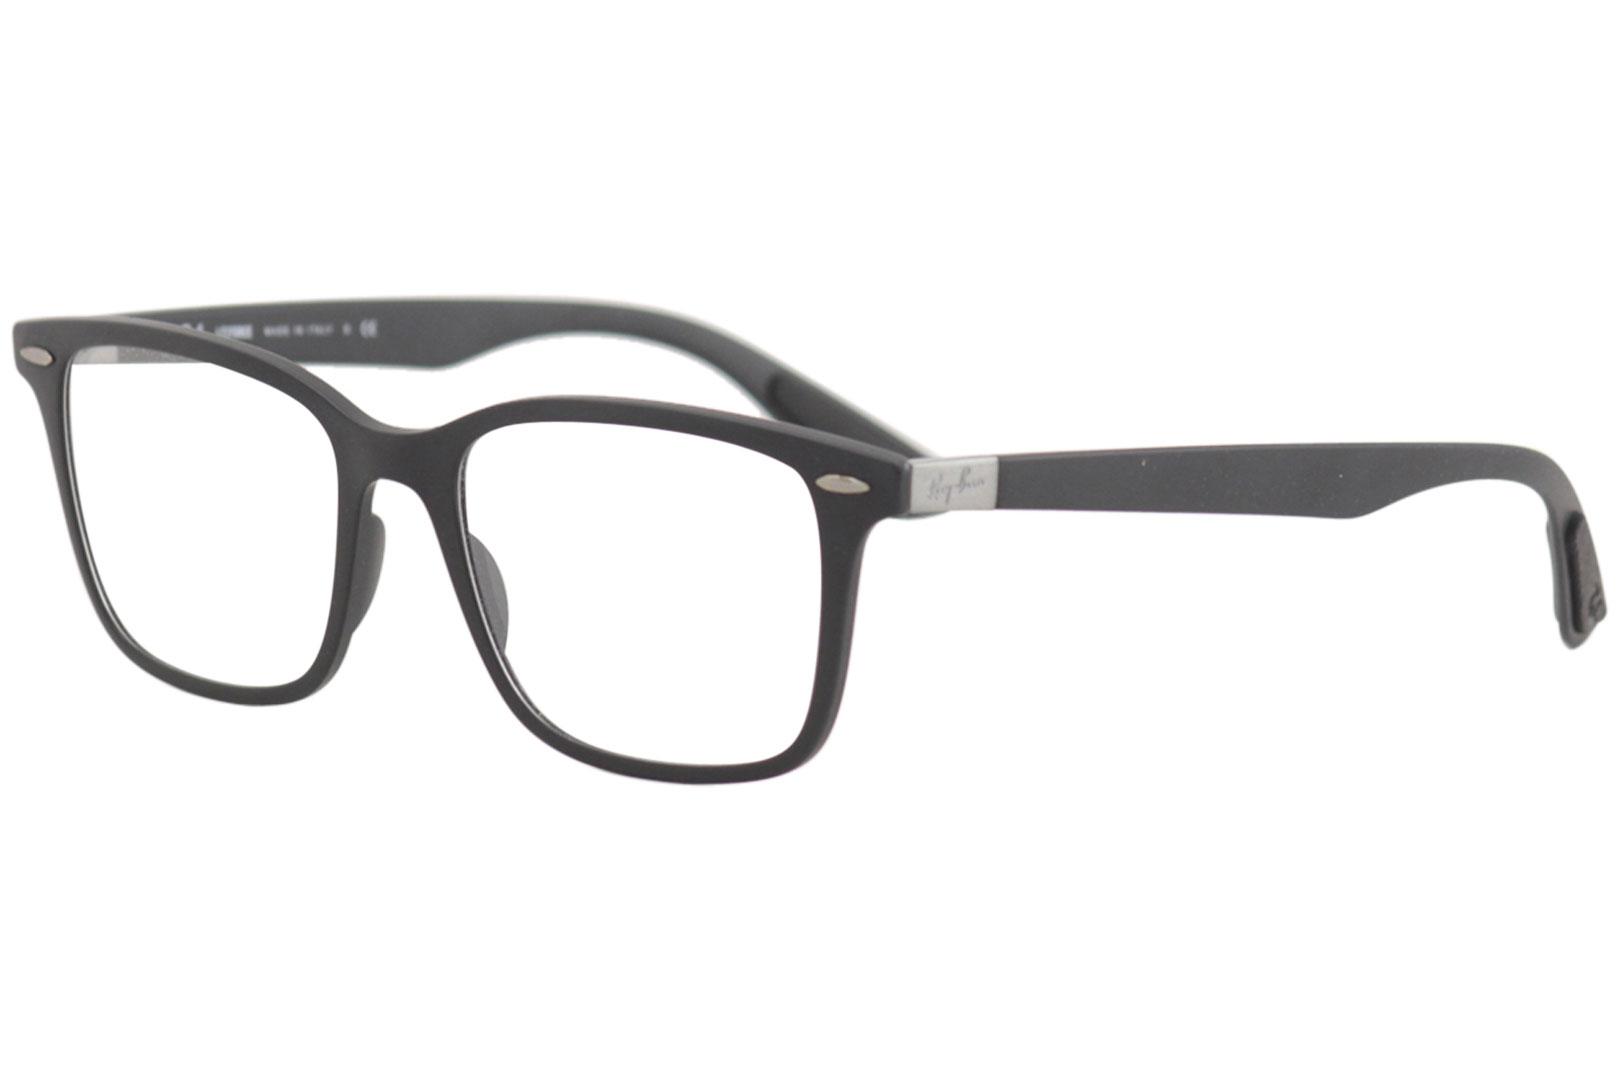 Extremely important Australia contact Ray Ban Eyeglasses RB7144 RB/7144 5204 Ray Ban Sand Black Optical Frame  53mm | EyeSpecs.com